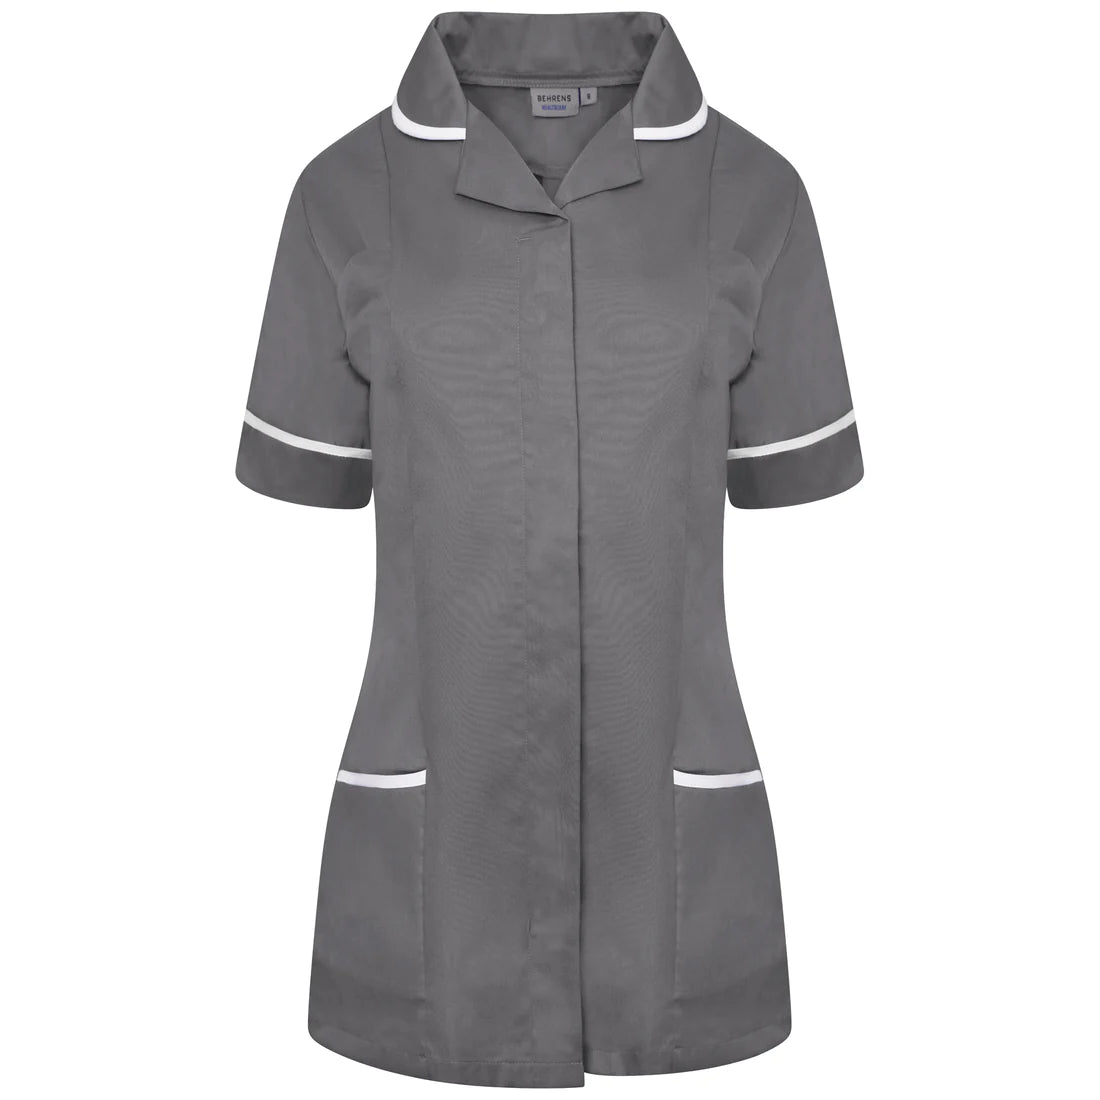 Storm Grey/White Contrast Ladies Tunic with Round Collar - NCLTPS